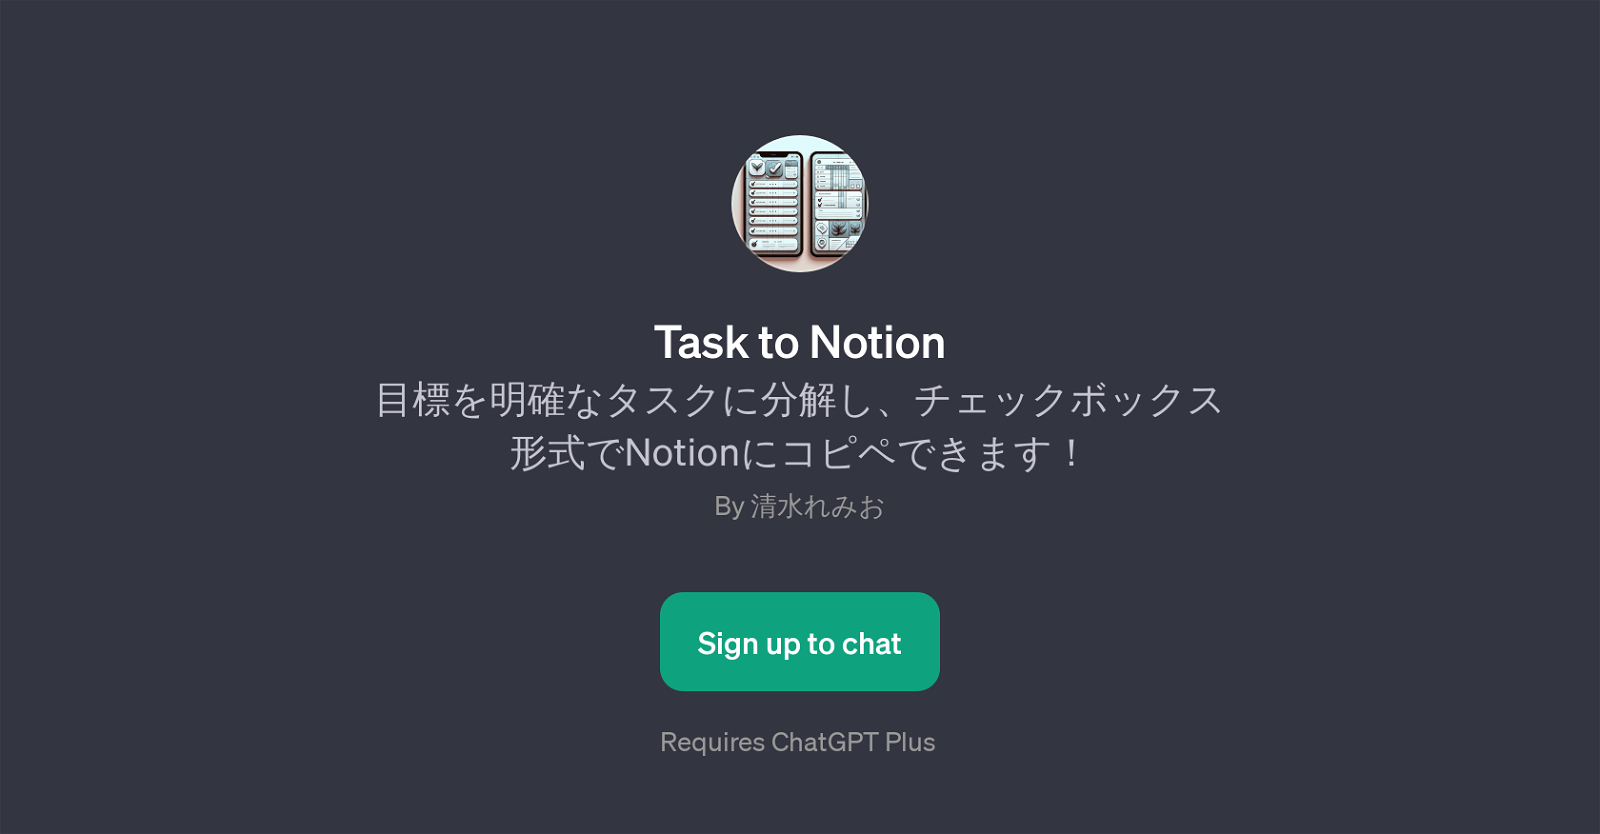 Task to Notion website